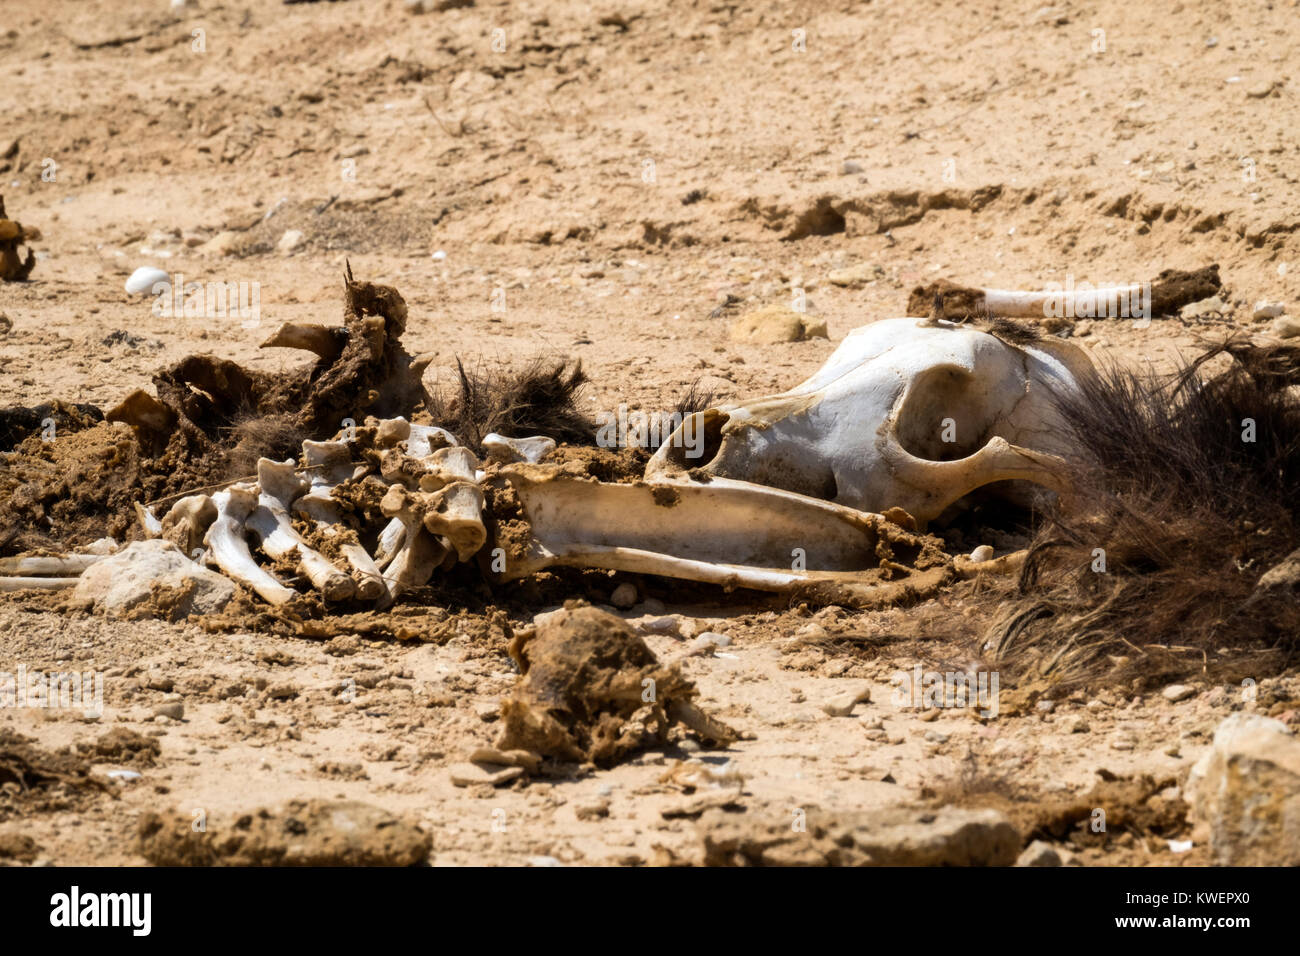 The bones and skull of a dead dog with the remains of wool and flesh lie on the ground in the desert Stock Photo